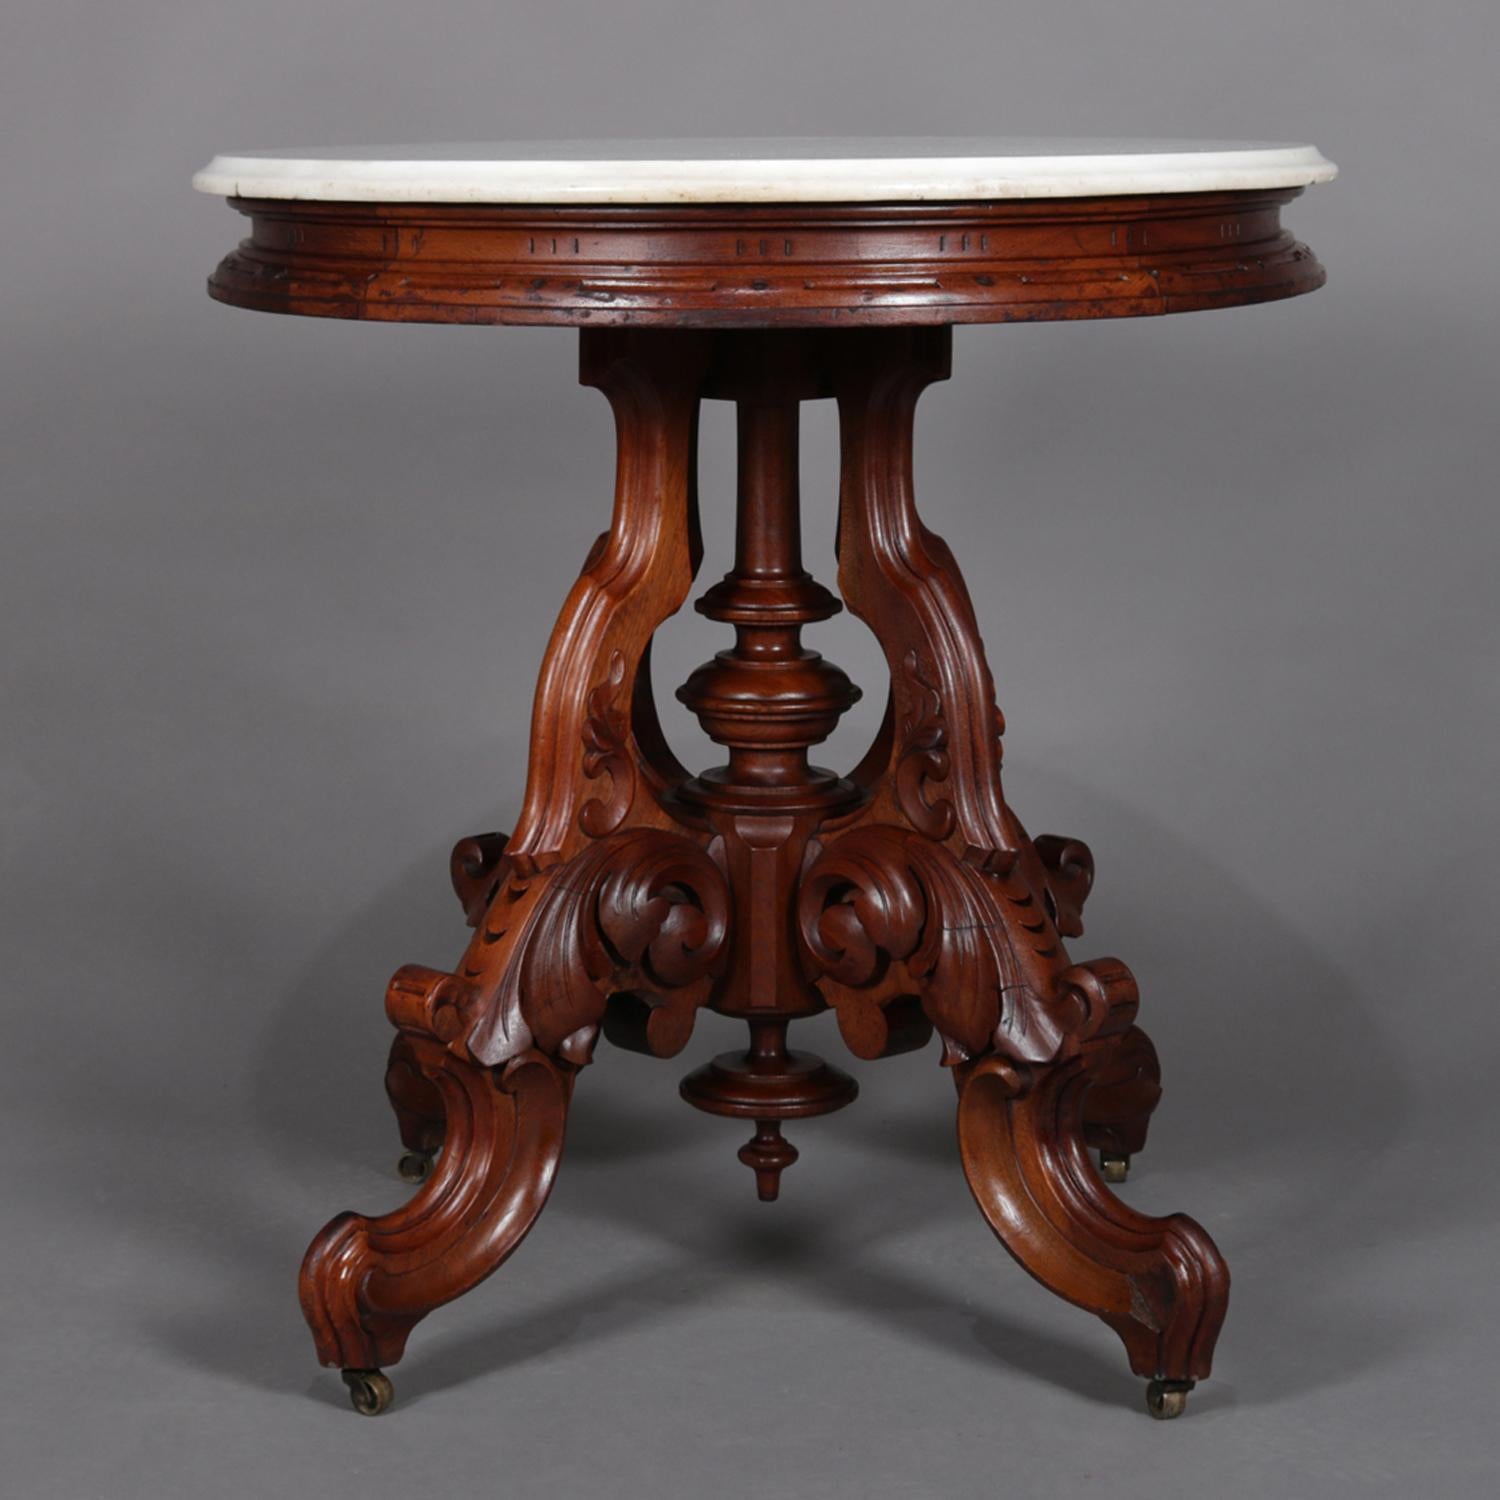 An antique Victorian center table by Berkey & Gay features beveled marble top surmounting walnut base with turned center column and carved acanthus and scroll form legs with casters, circa 1890.

***DELIVERY NOTICE – Due to COVID-19 we are employing